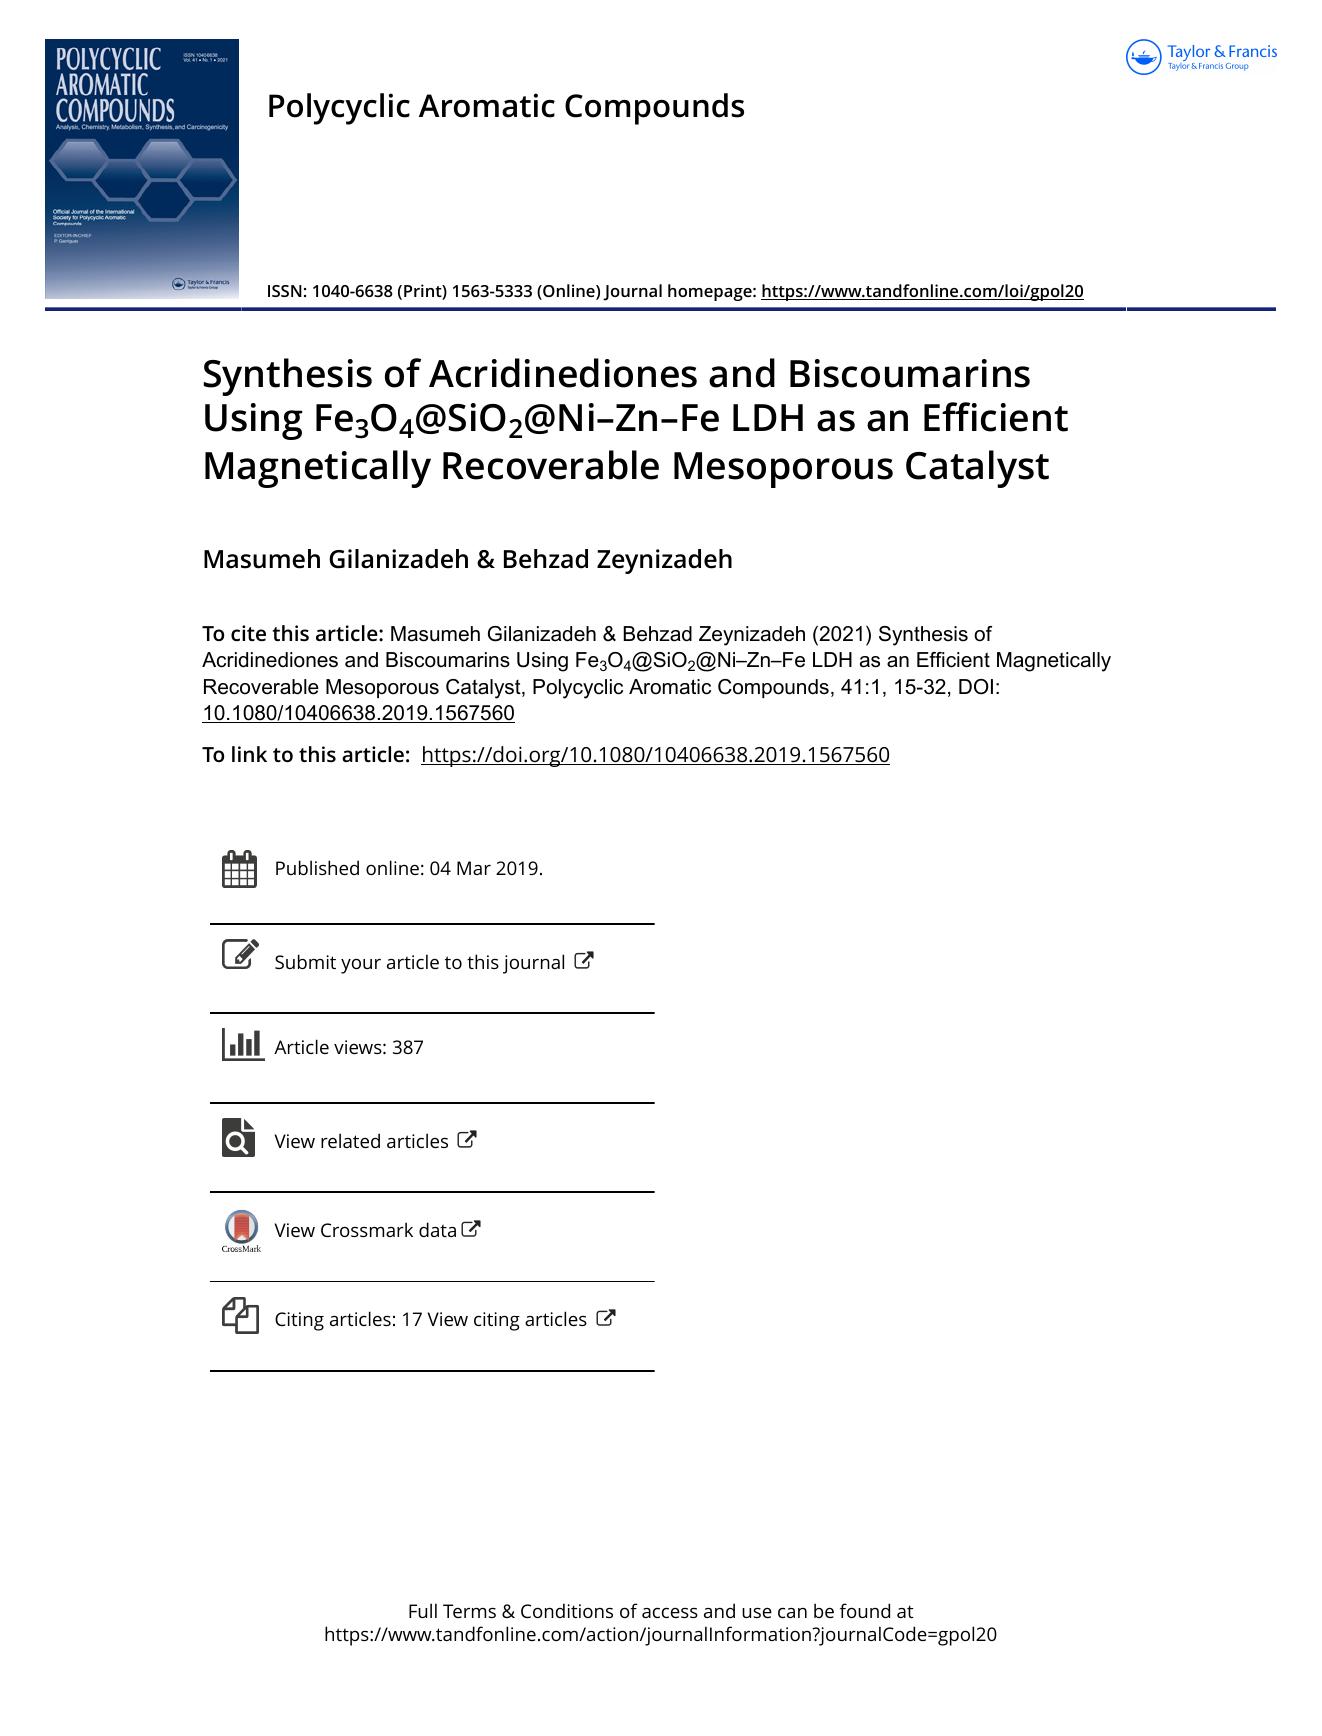 Synthesis of Acridinediones and Biscoumarins Using Fe3O4@SiO2@NiâZnâFe LDH as an Efficient Magnetically Recoverable Mesoporous Catalyst by Gilanizadeh Masumeh & Zeynizadeh Behzad